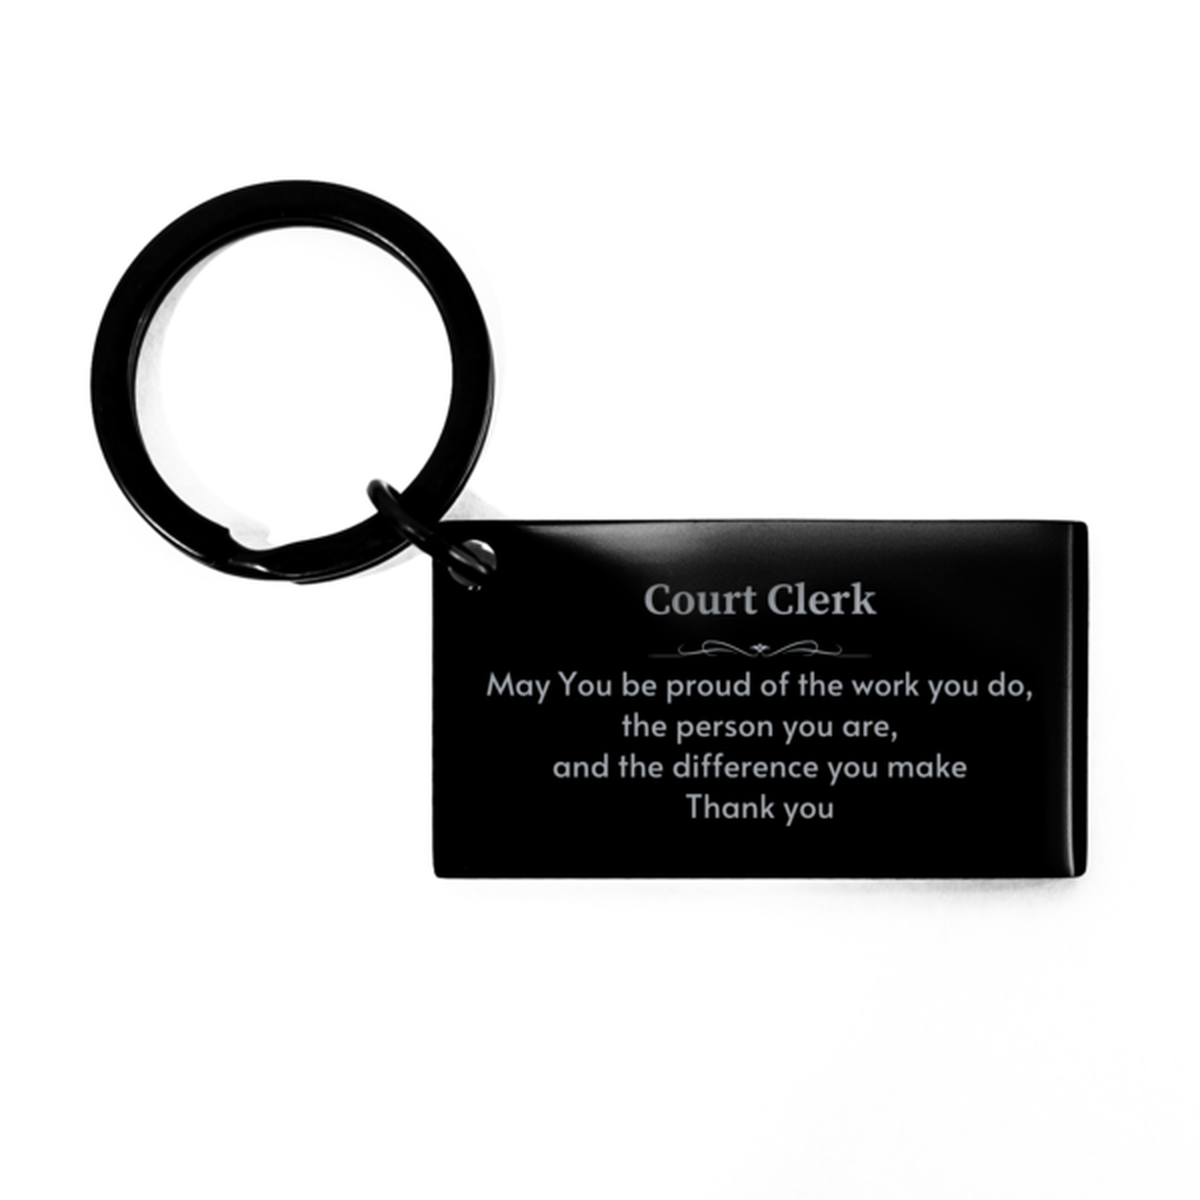 Heartwarming Keychain Retirement Coworkers Gifts for Court Clerk, Financial Advisor May You be proud of the work you do, the person you are Gifts for Boss Men Women Friends